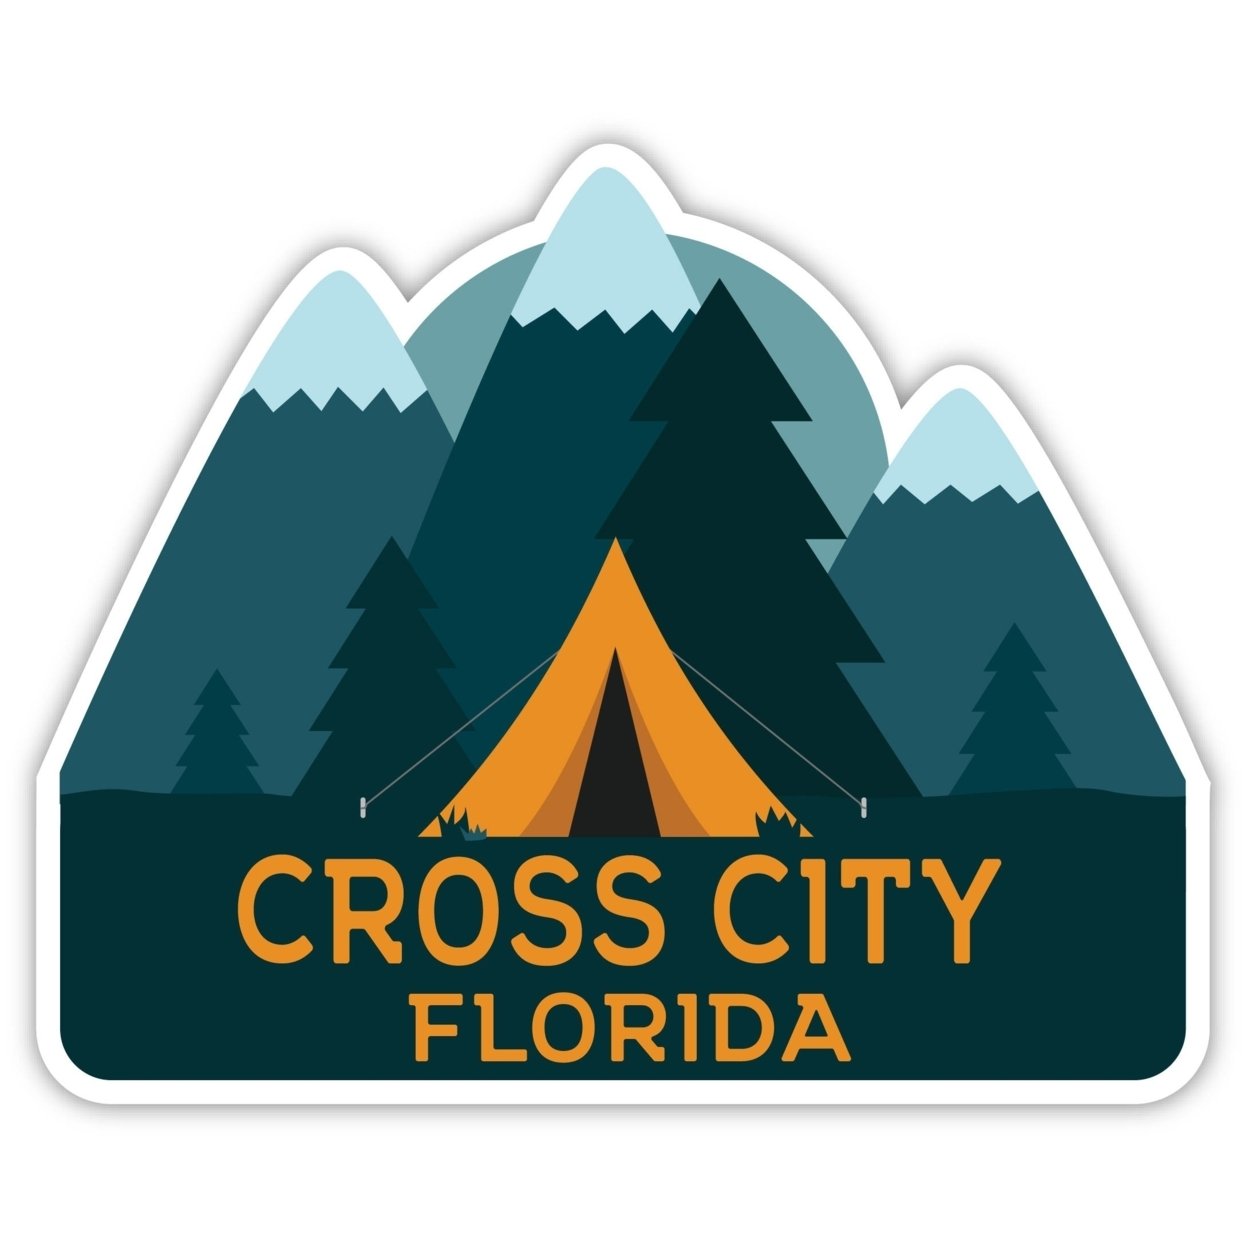 Cross City Florida Souvenir Decorative Stickers (Choose Theme And Size) - 4-Pack, 6-Inch, Tent